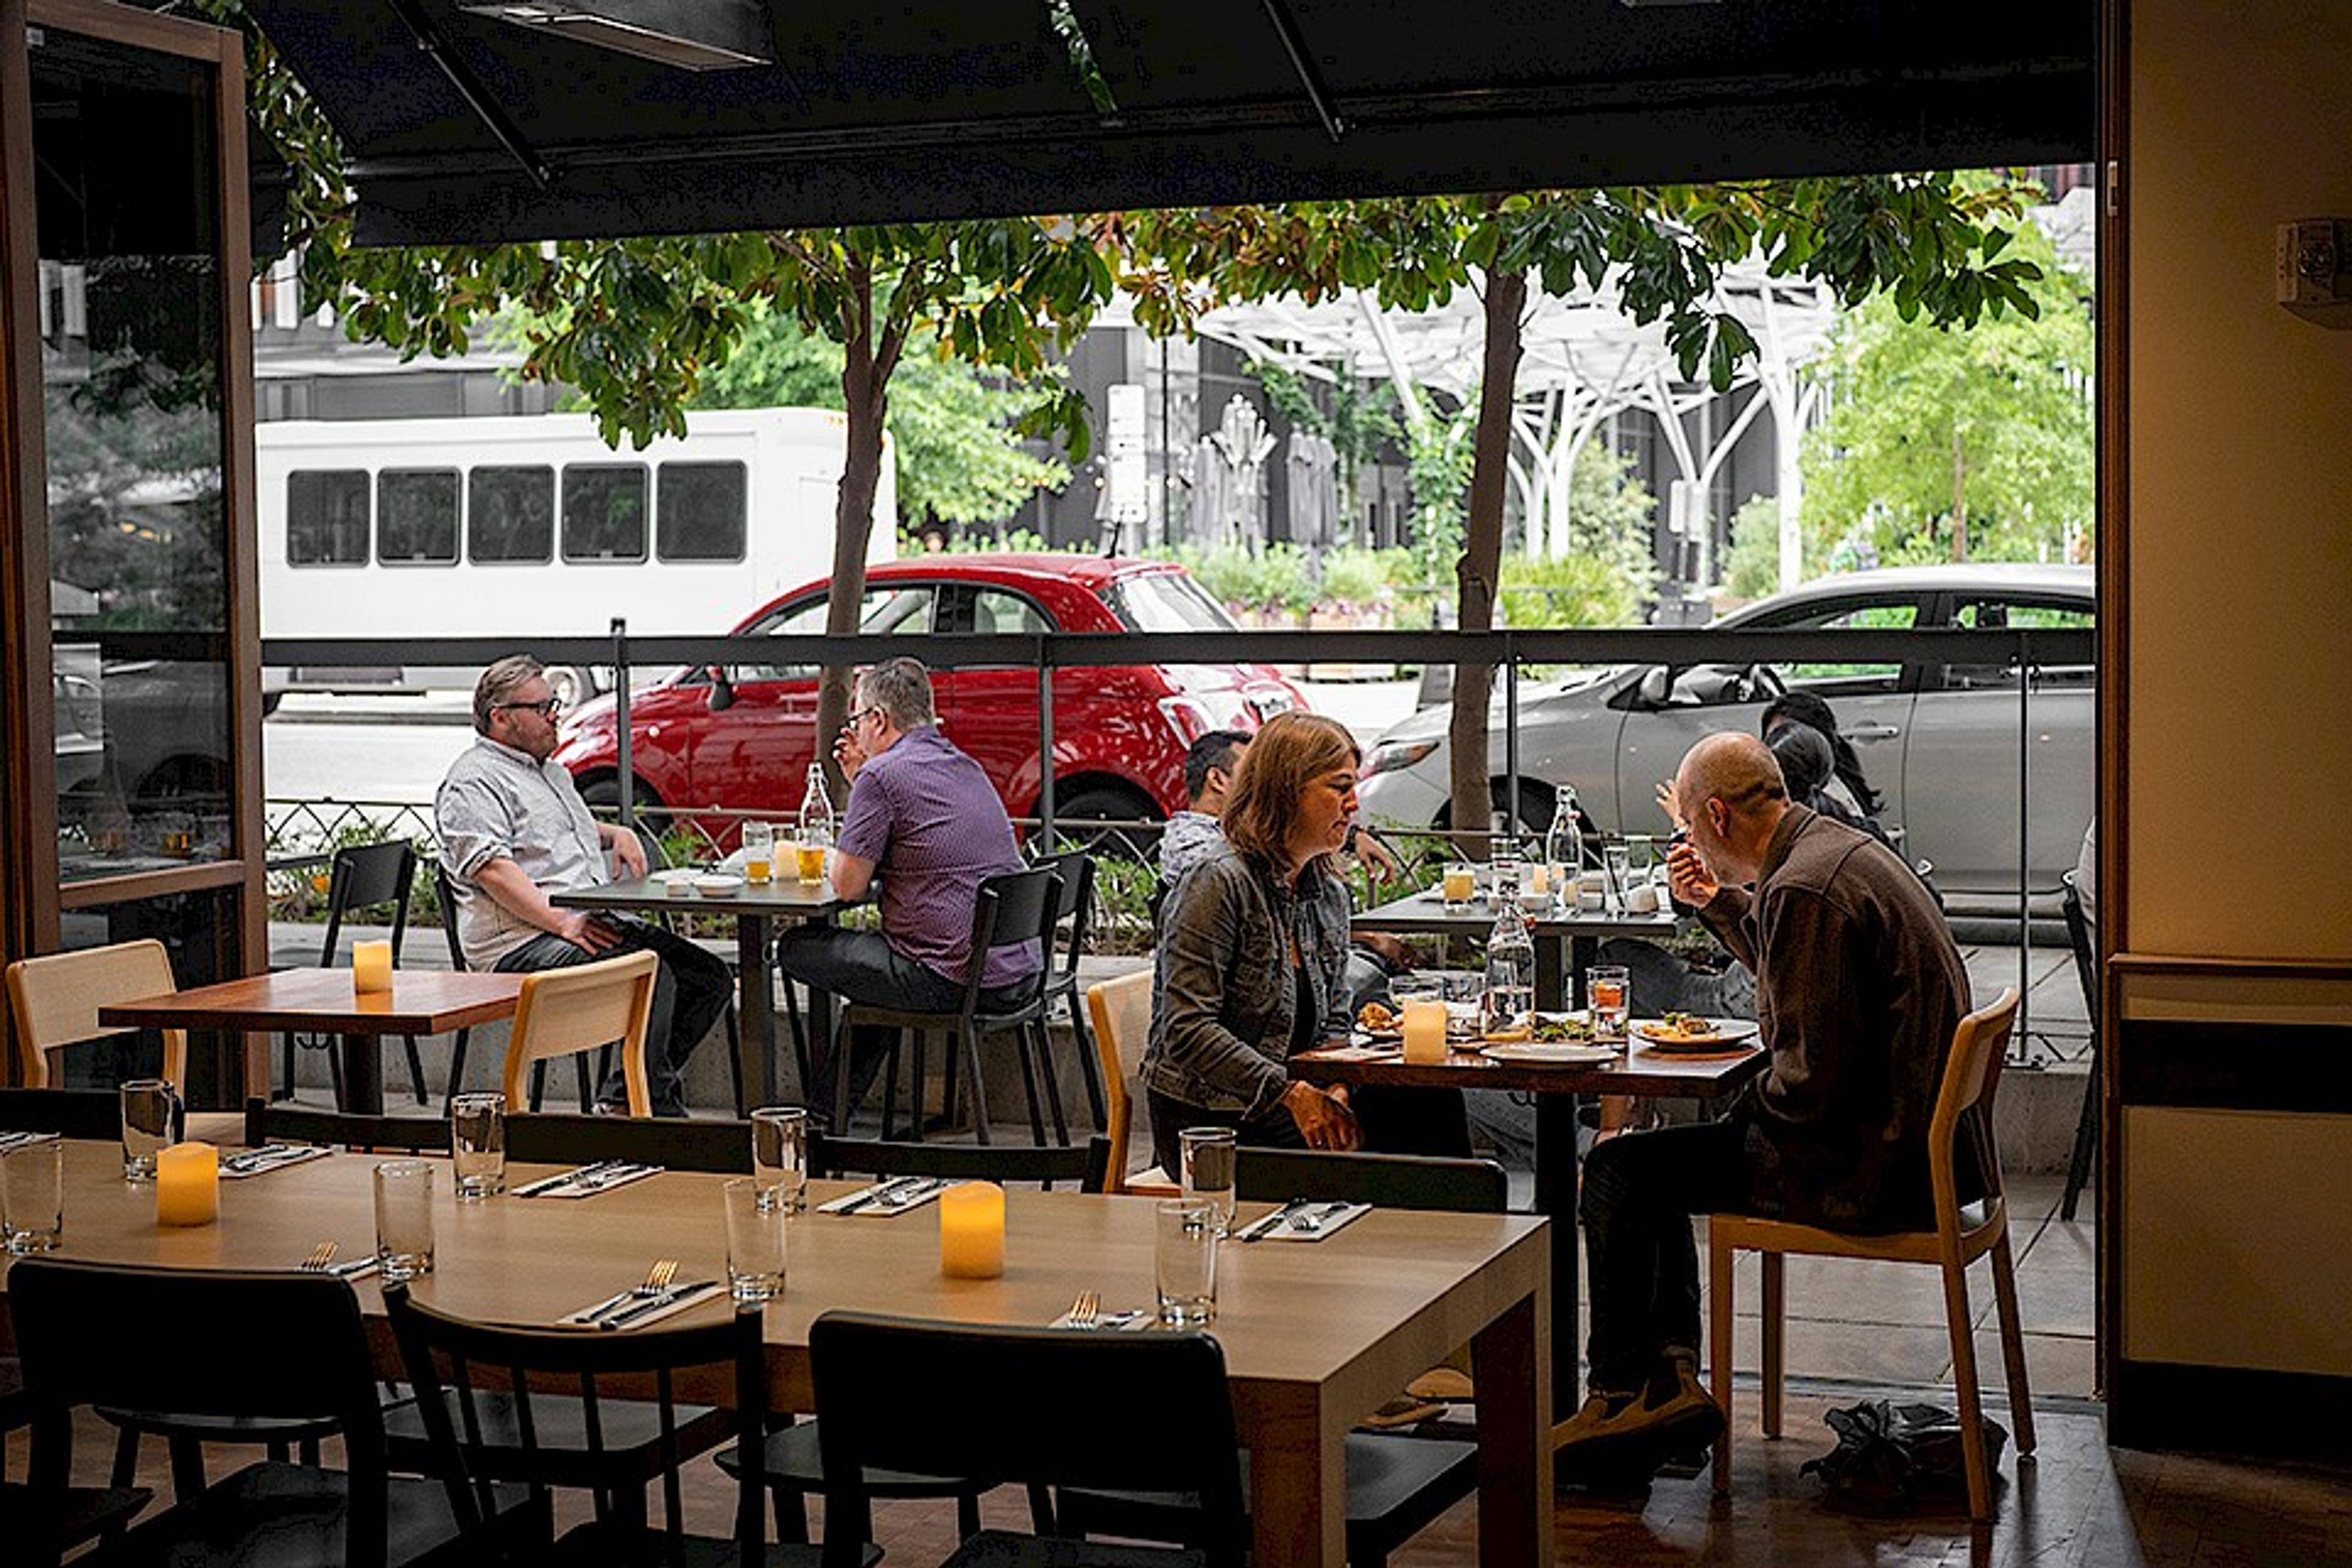 customers eating inside and outside of a large open retractable wall